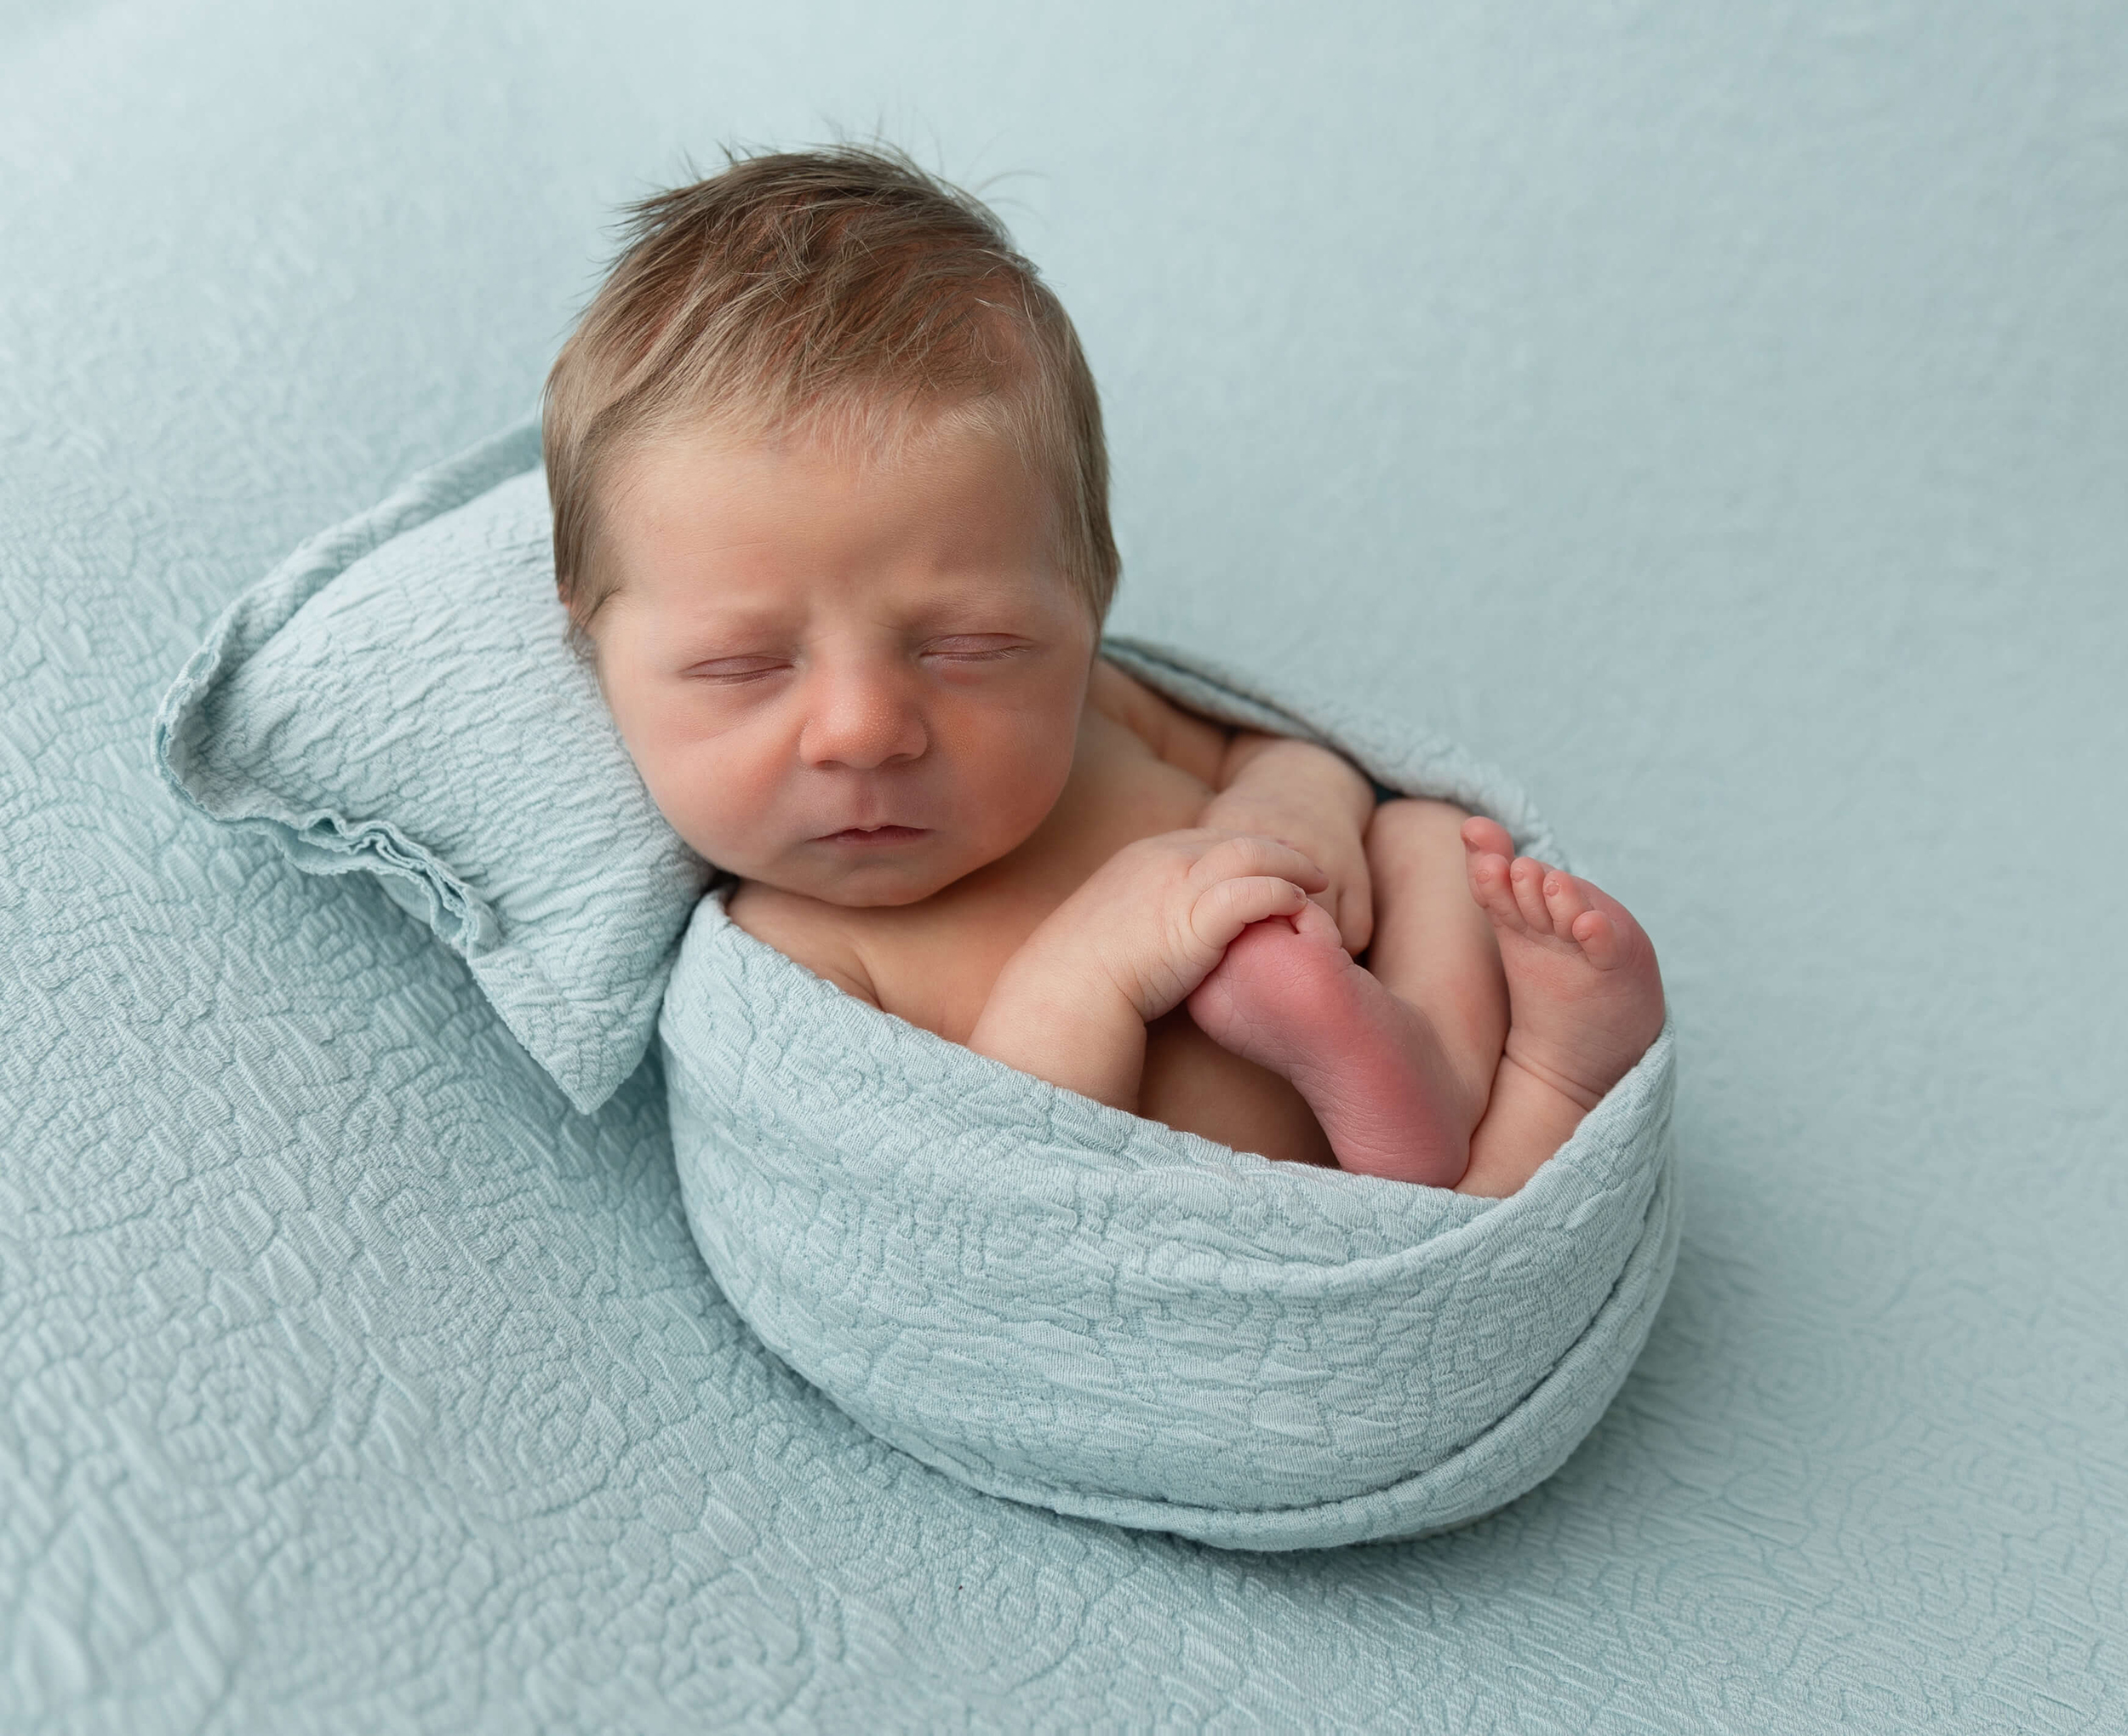 Newborn picture of a baby boy wrapped in light blue laying on a pillow